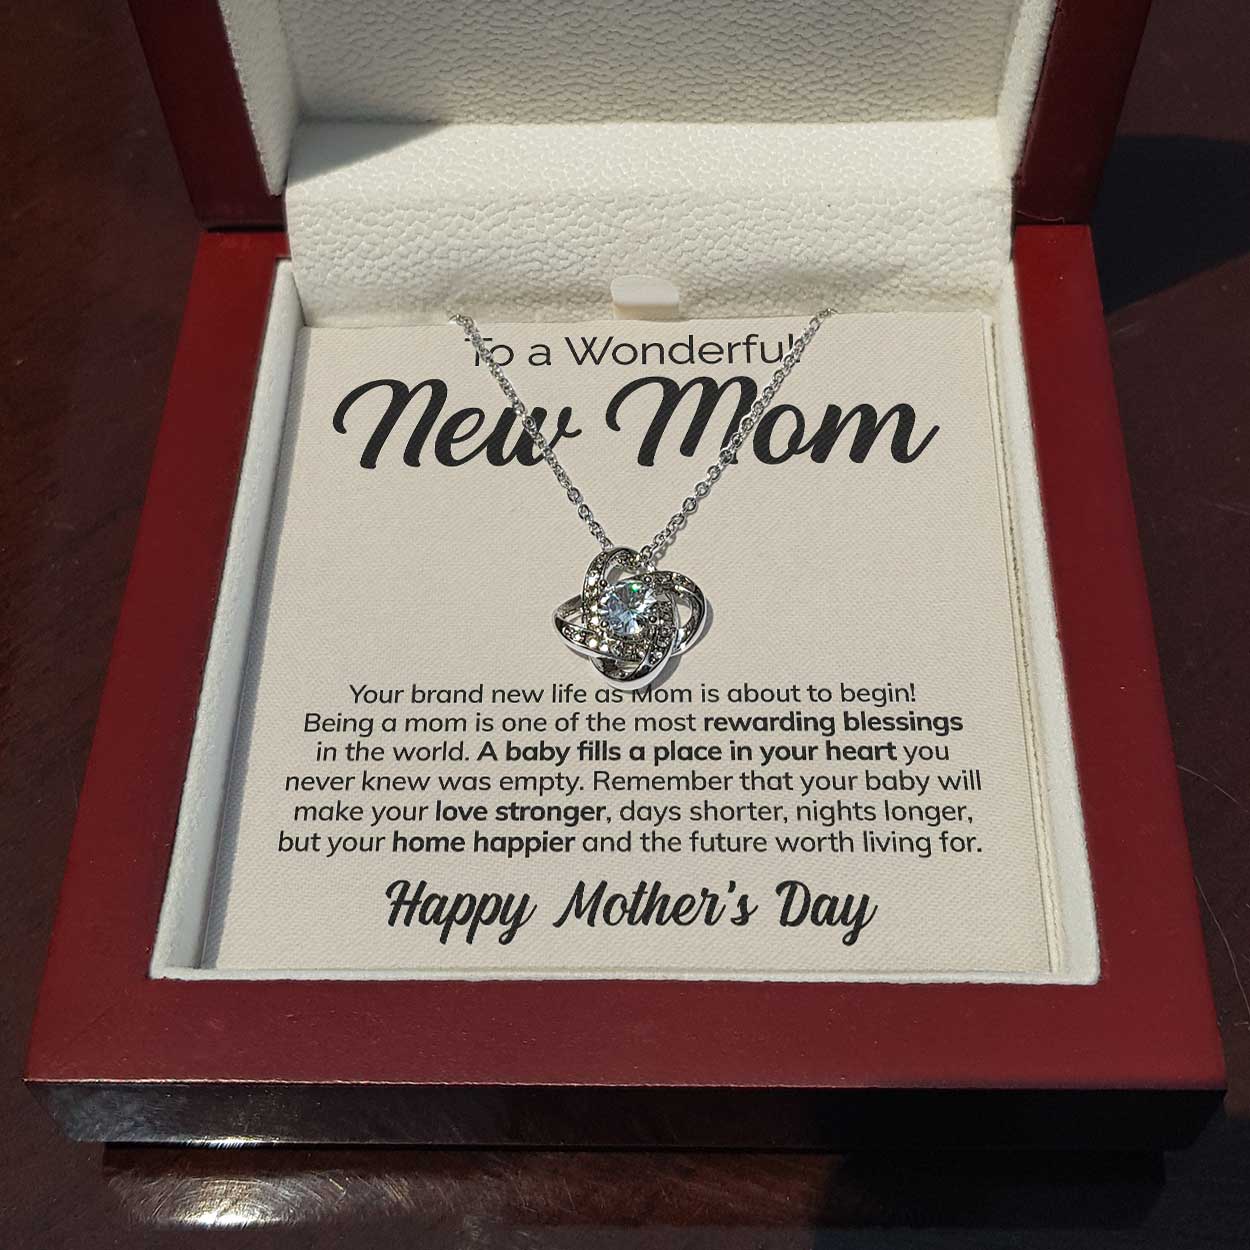 ShineOn Fulfillment Message Cards Standard Box To a Wonderful New Mom - Rewarding Blessings - Love Knot Necklace